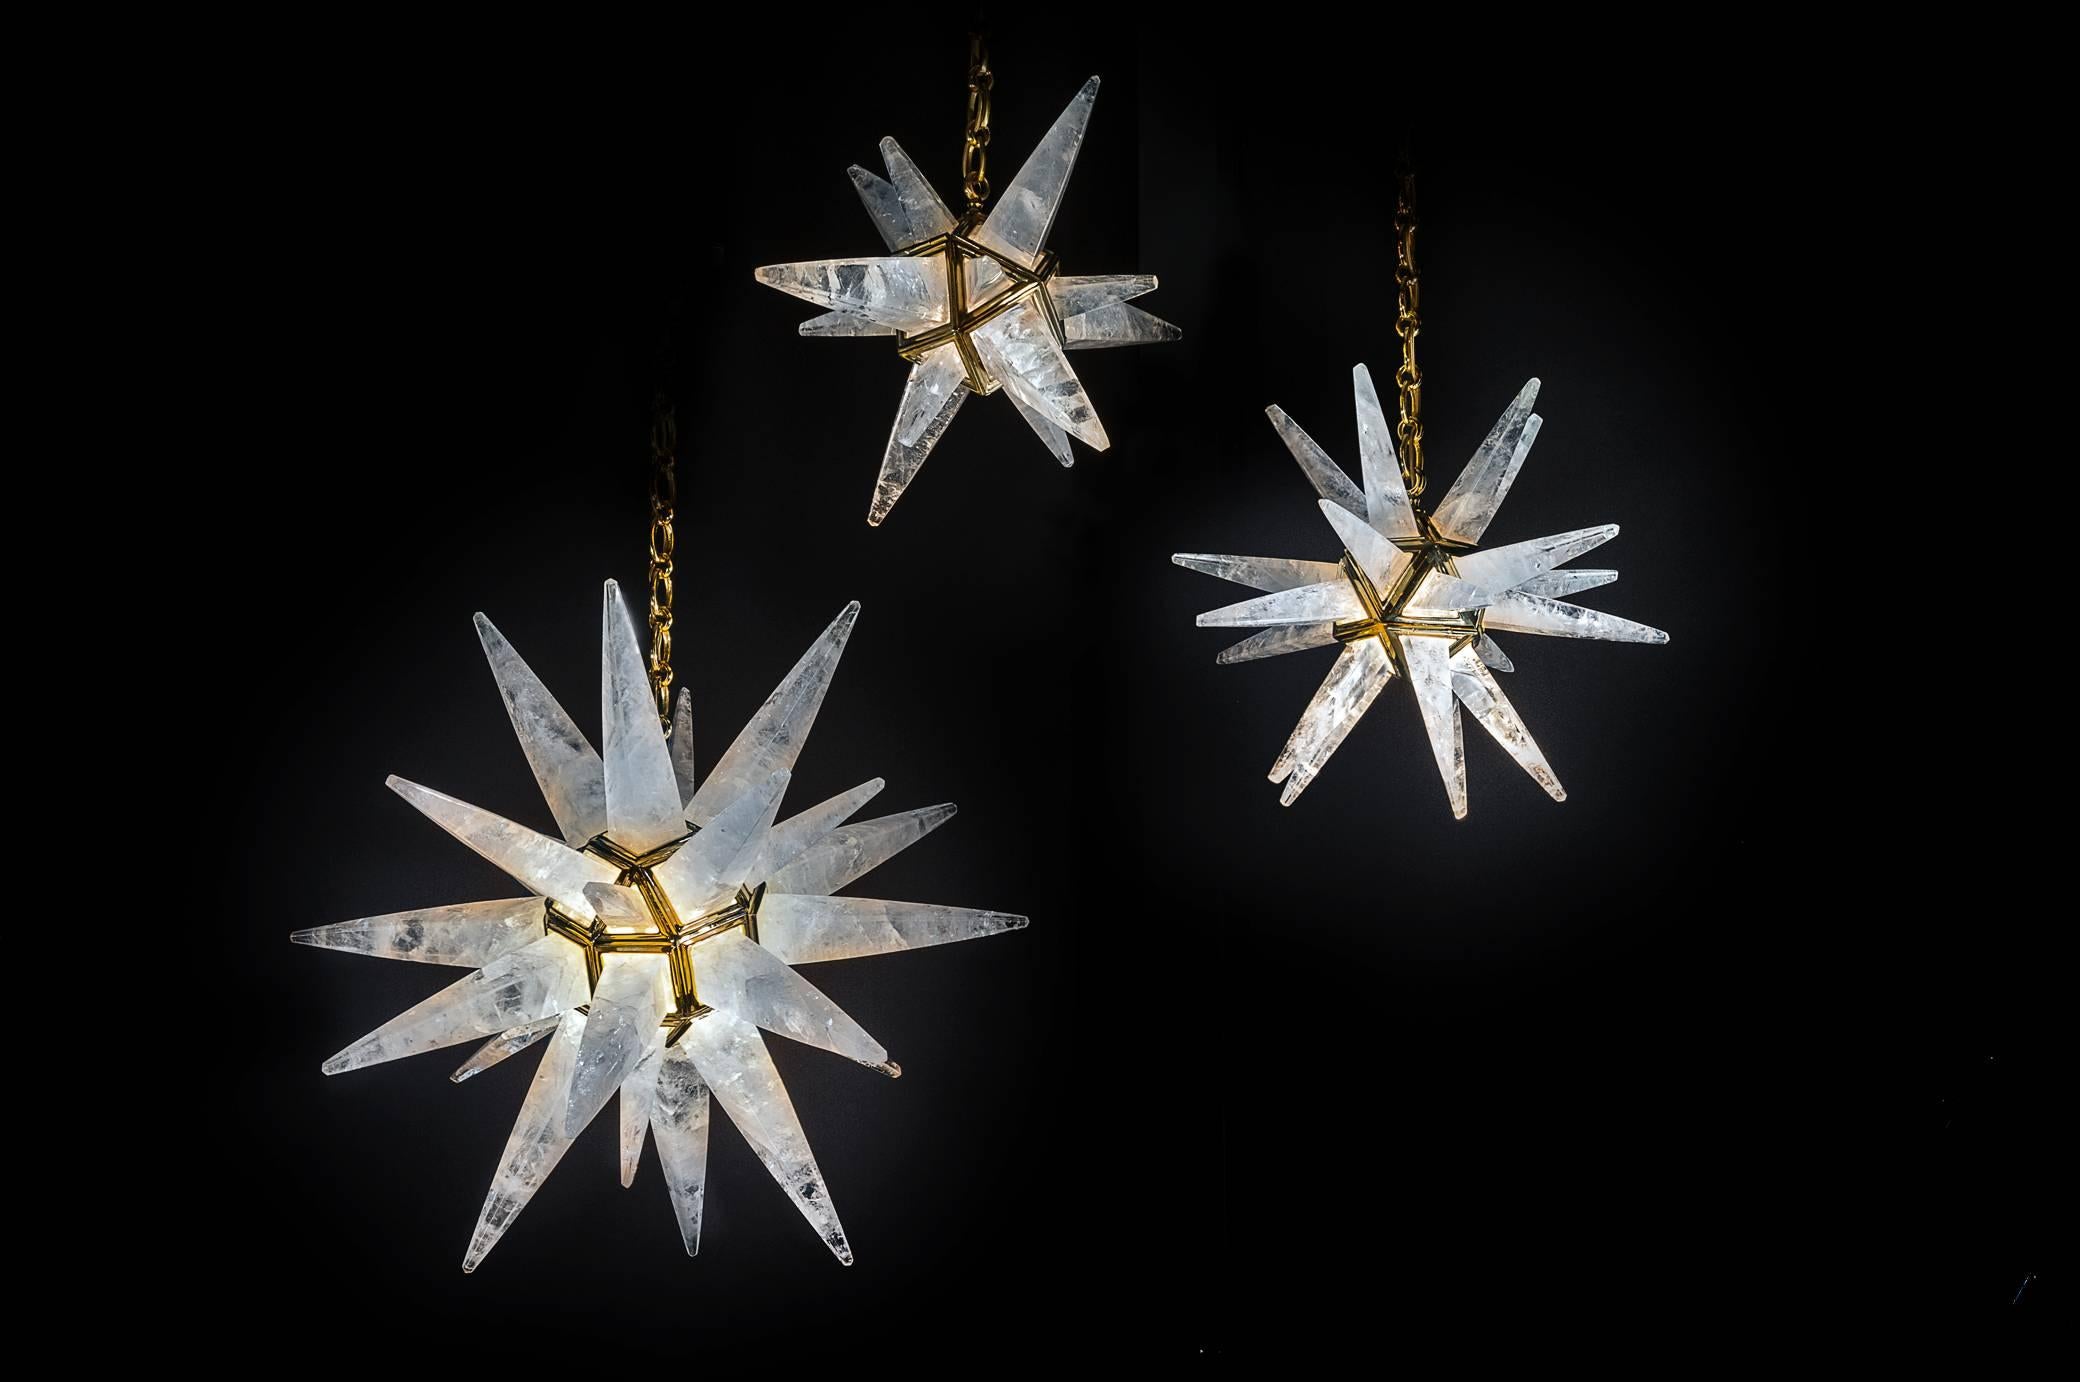 Since 2011 Alexandre Vossion was the first who made this model only in rock crystal after an Art Deco model. (Which is made only in glass).
This rock crystal quartz star lighting is made in France.
Rock crystal star light gold edition.
On this